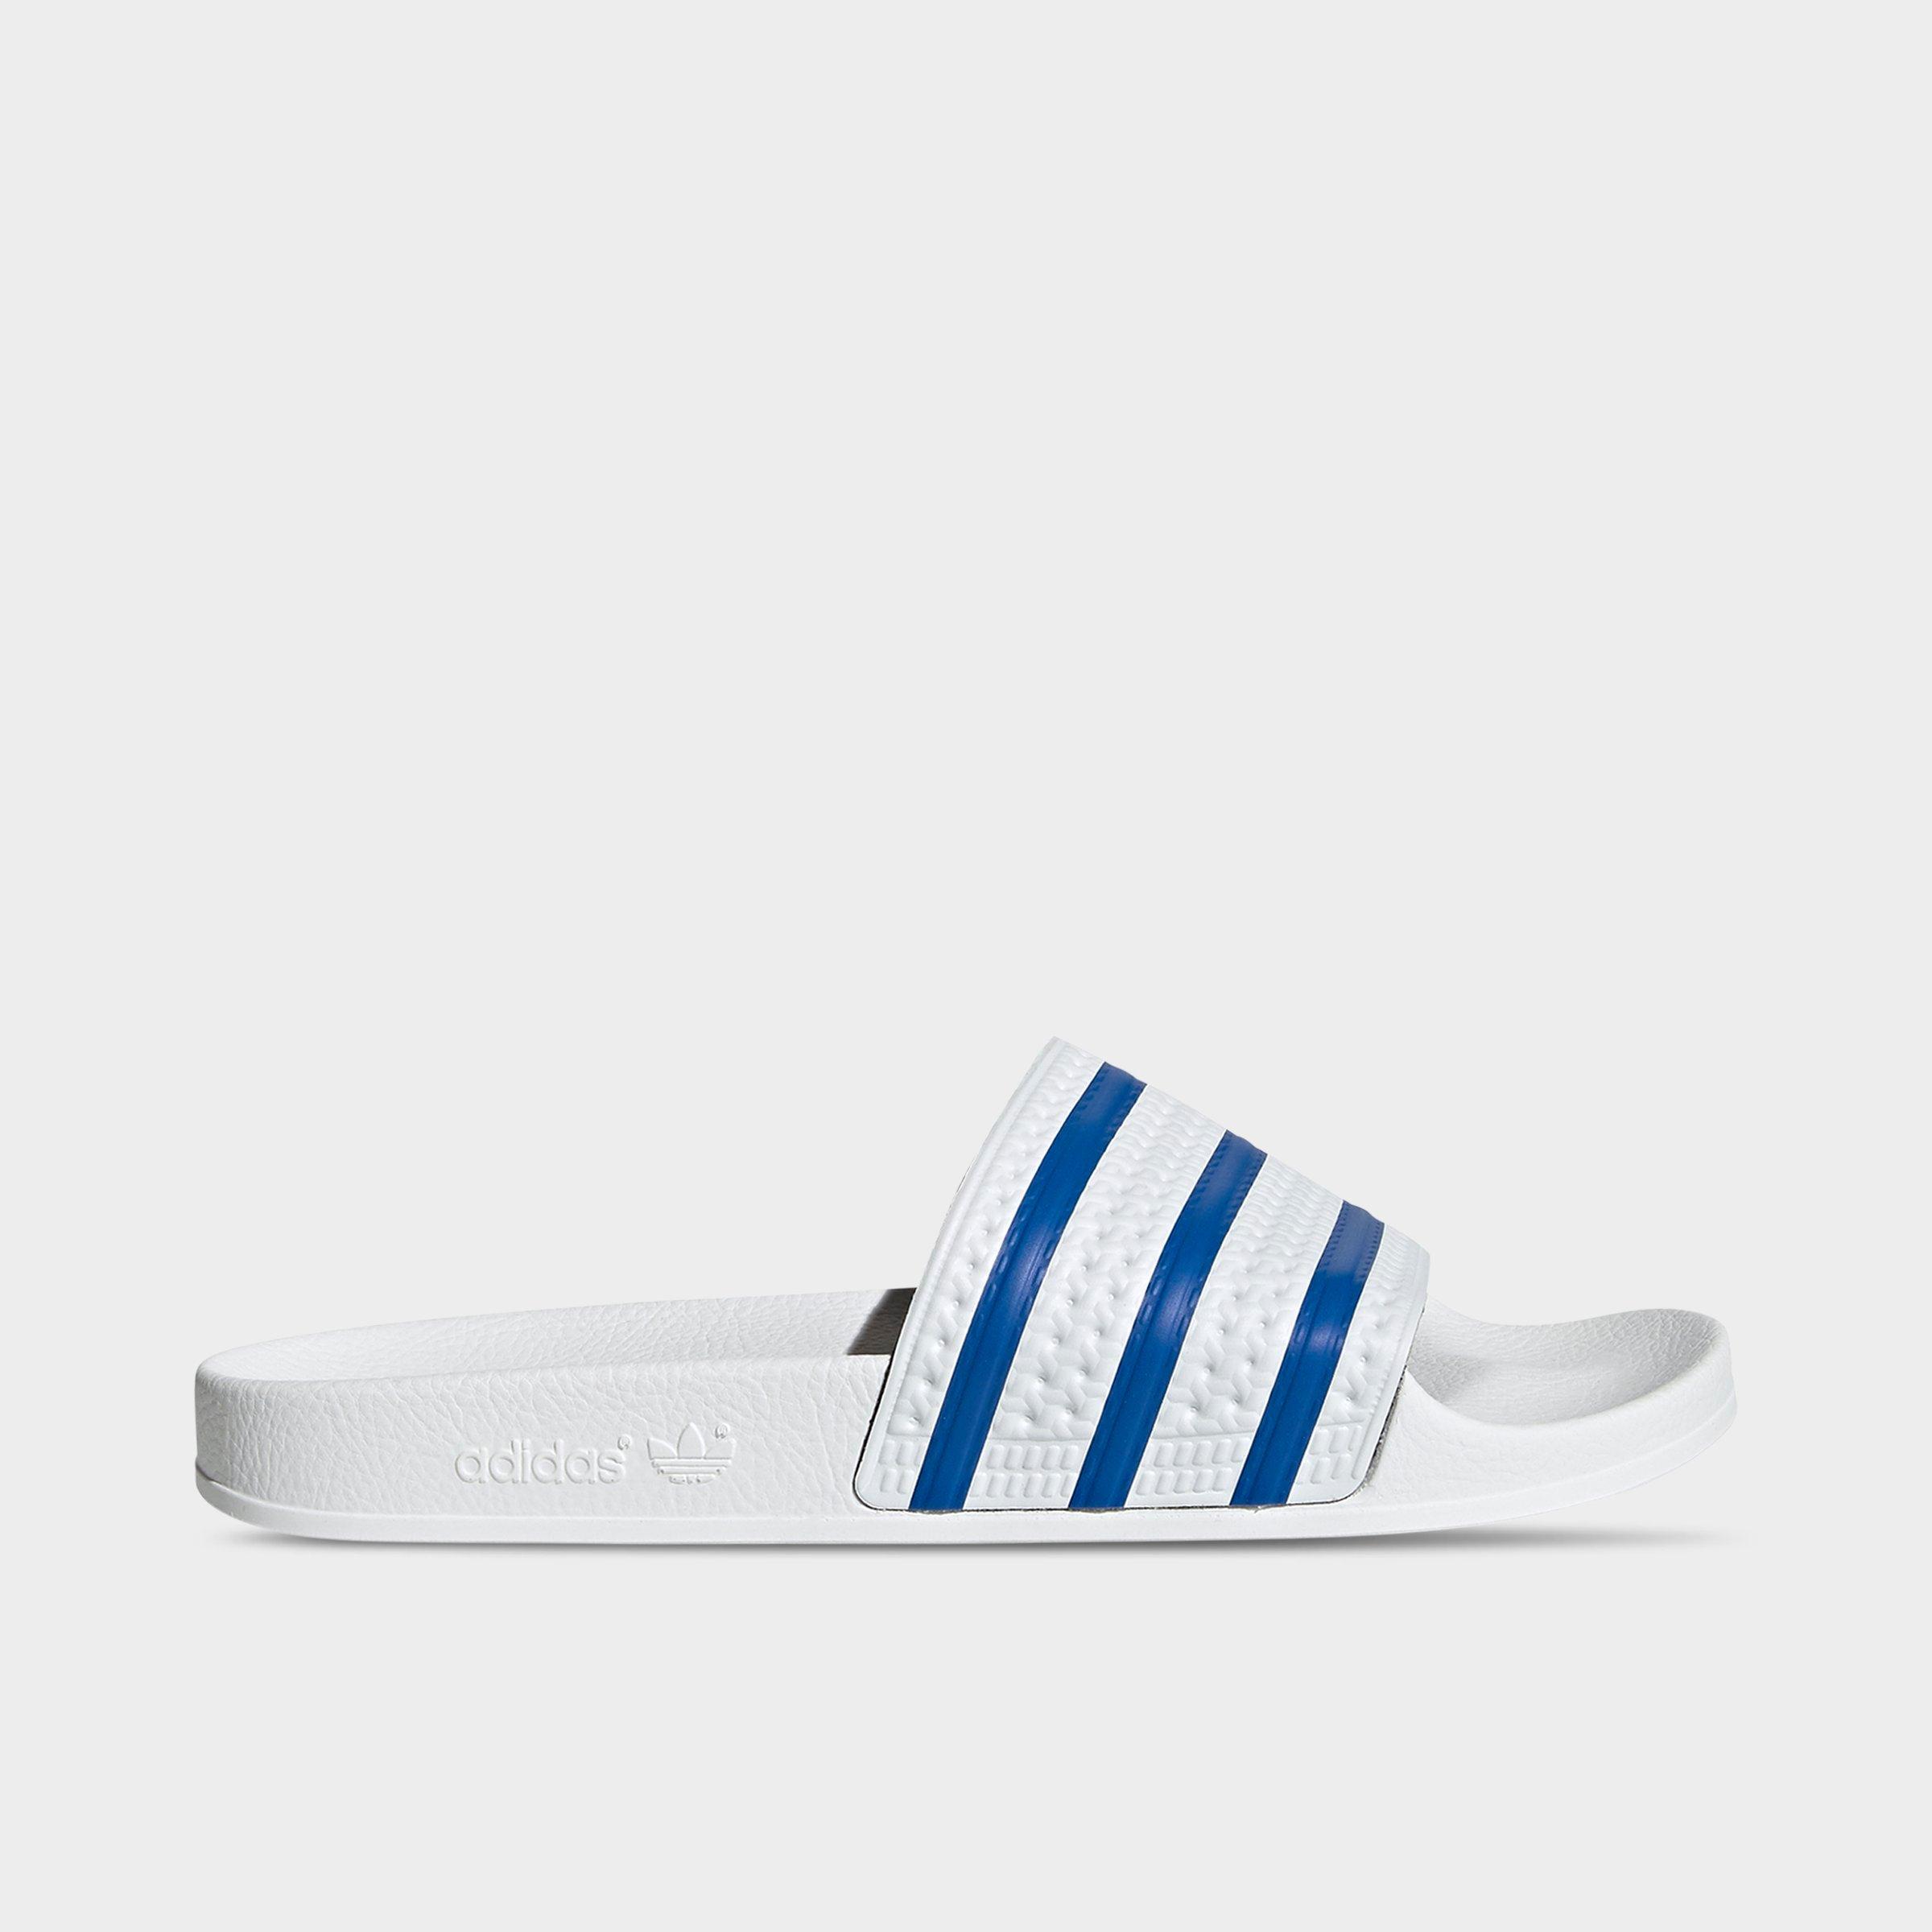 total sports adidas sandals